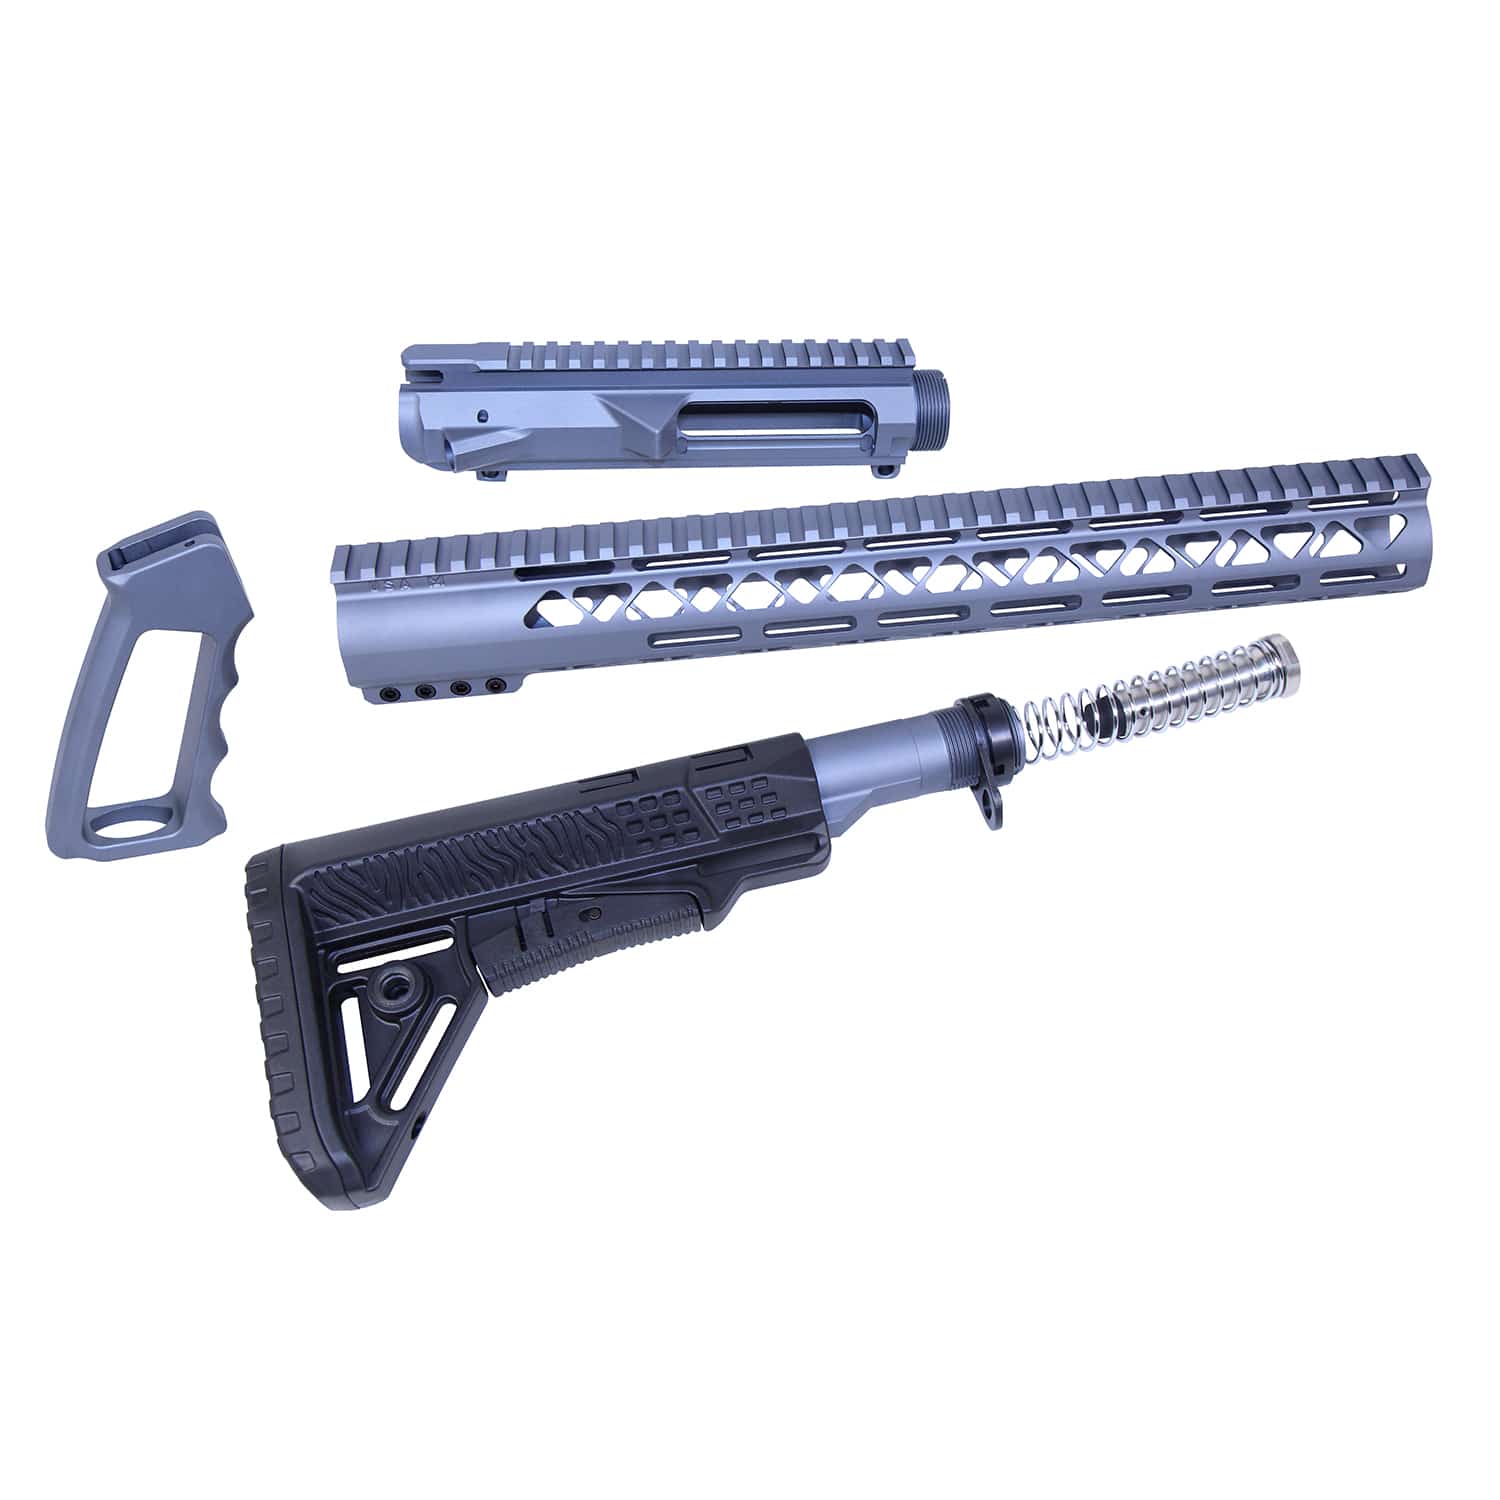 Complete AR .308 furniture set with upper receiver, all in matching anodized grey.